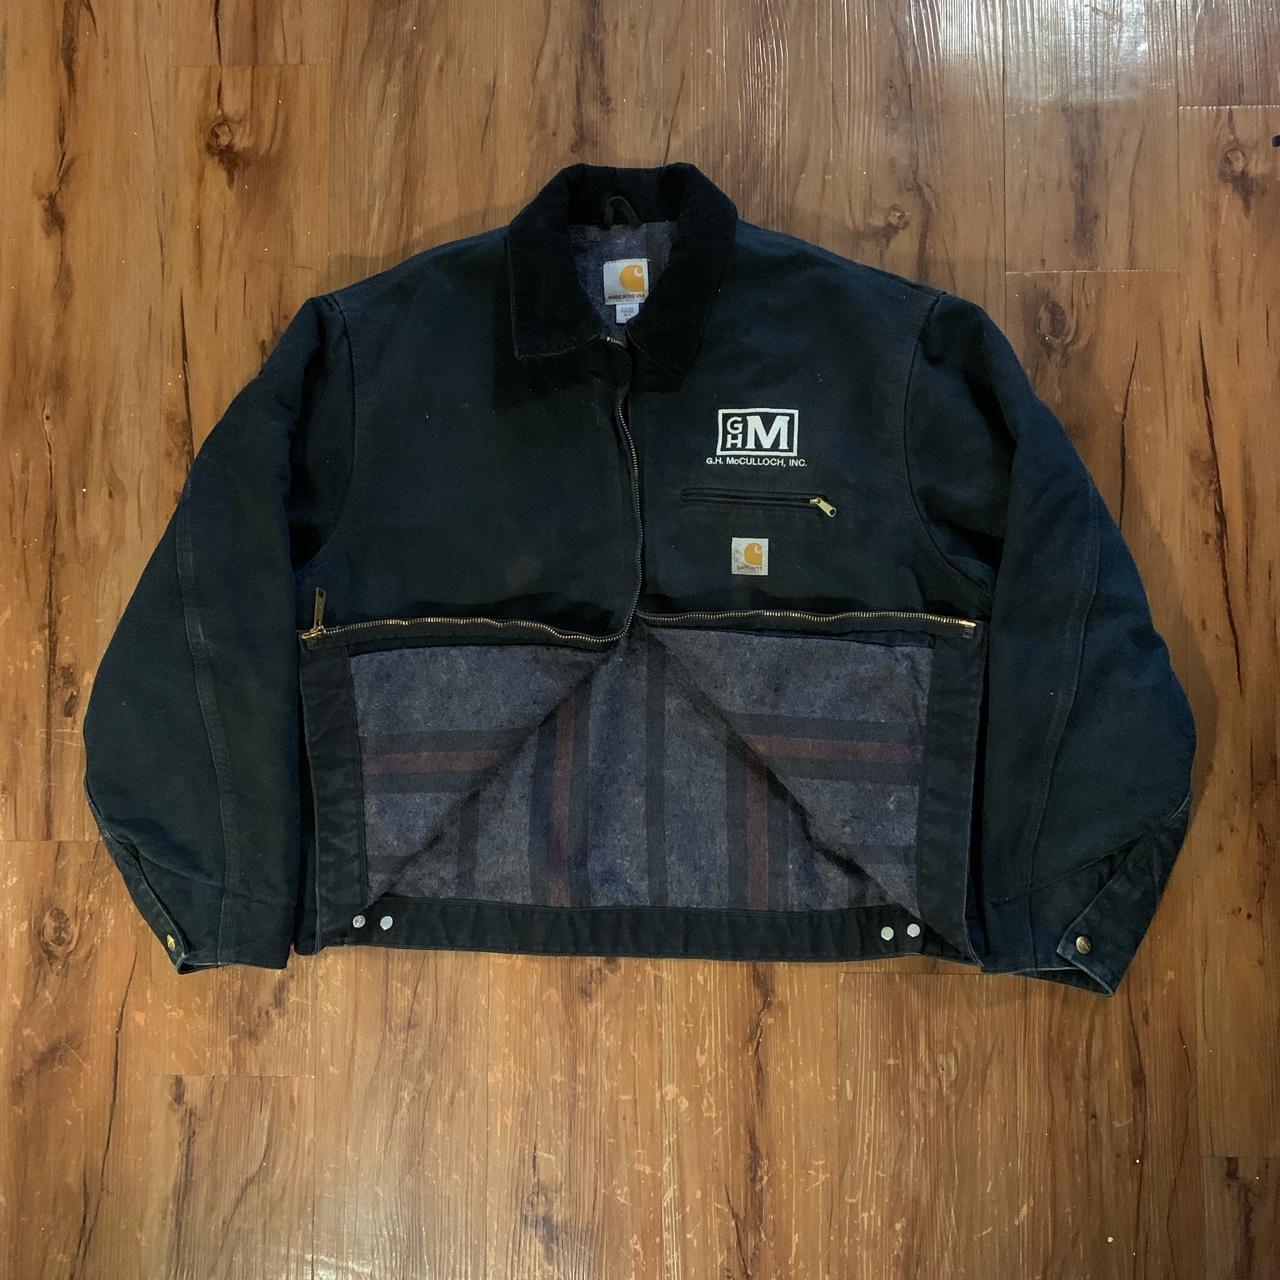 Product Image 4 - carhartt detroit jacket
there are some